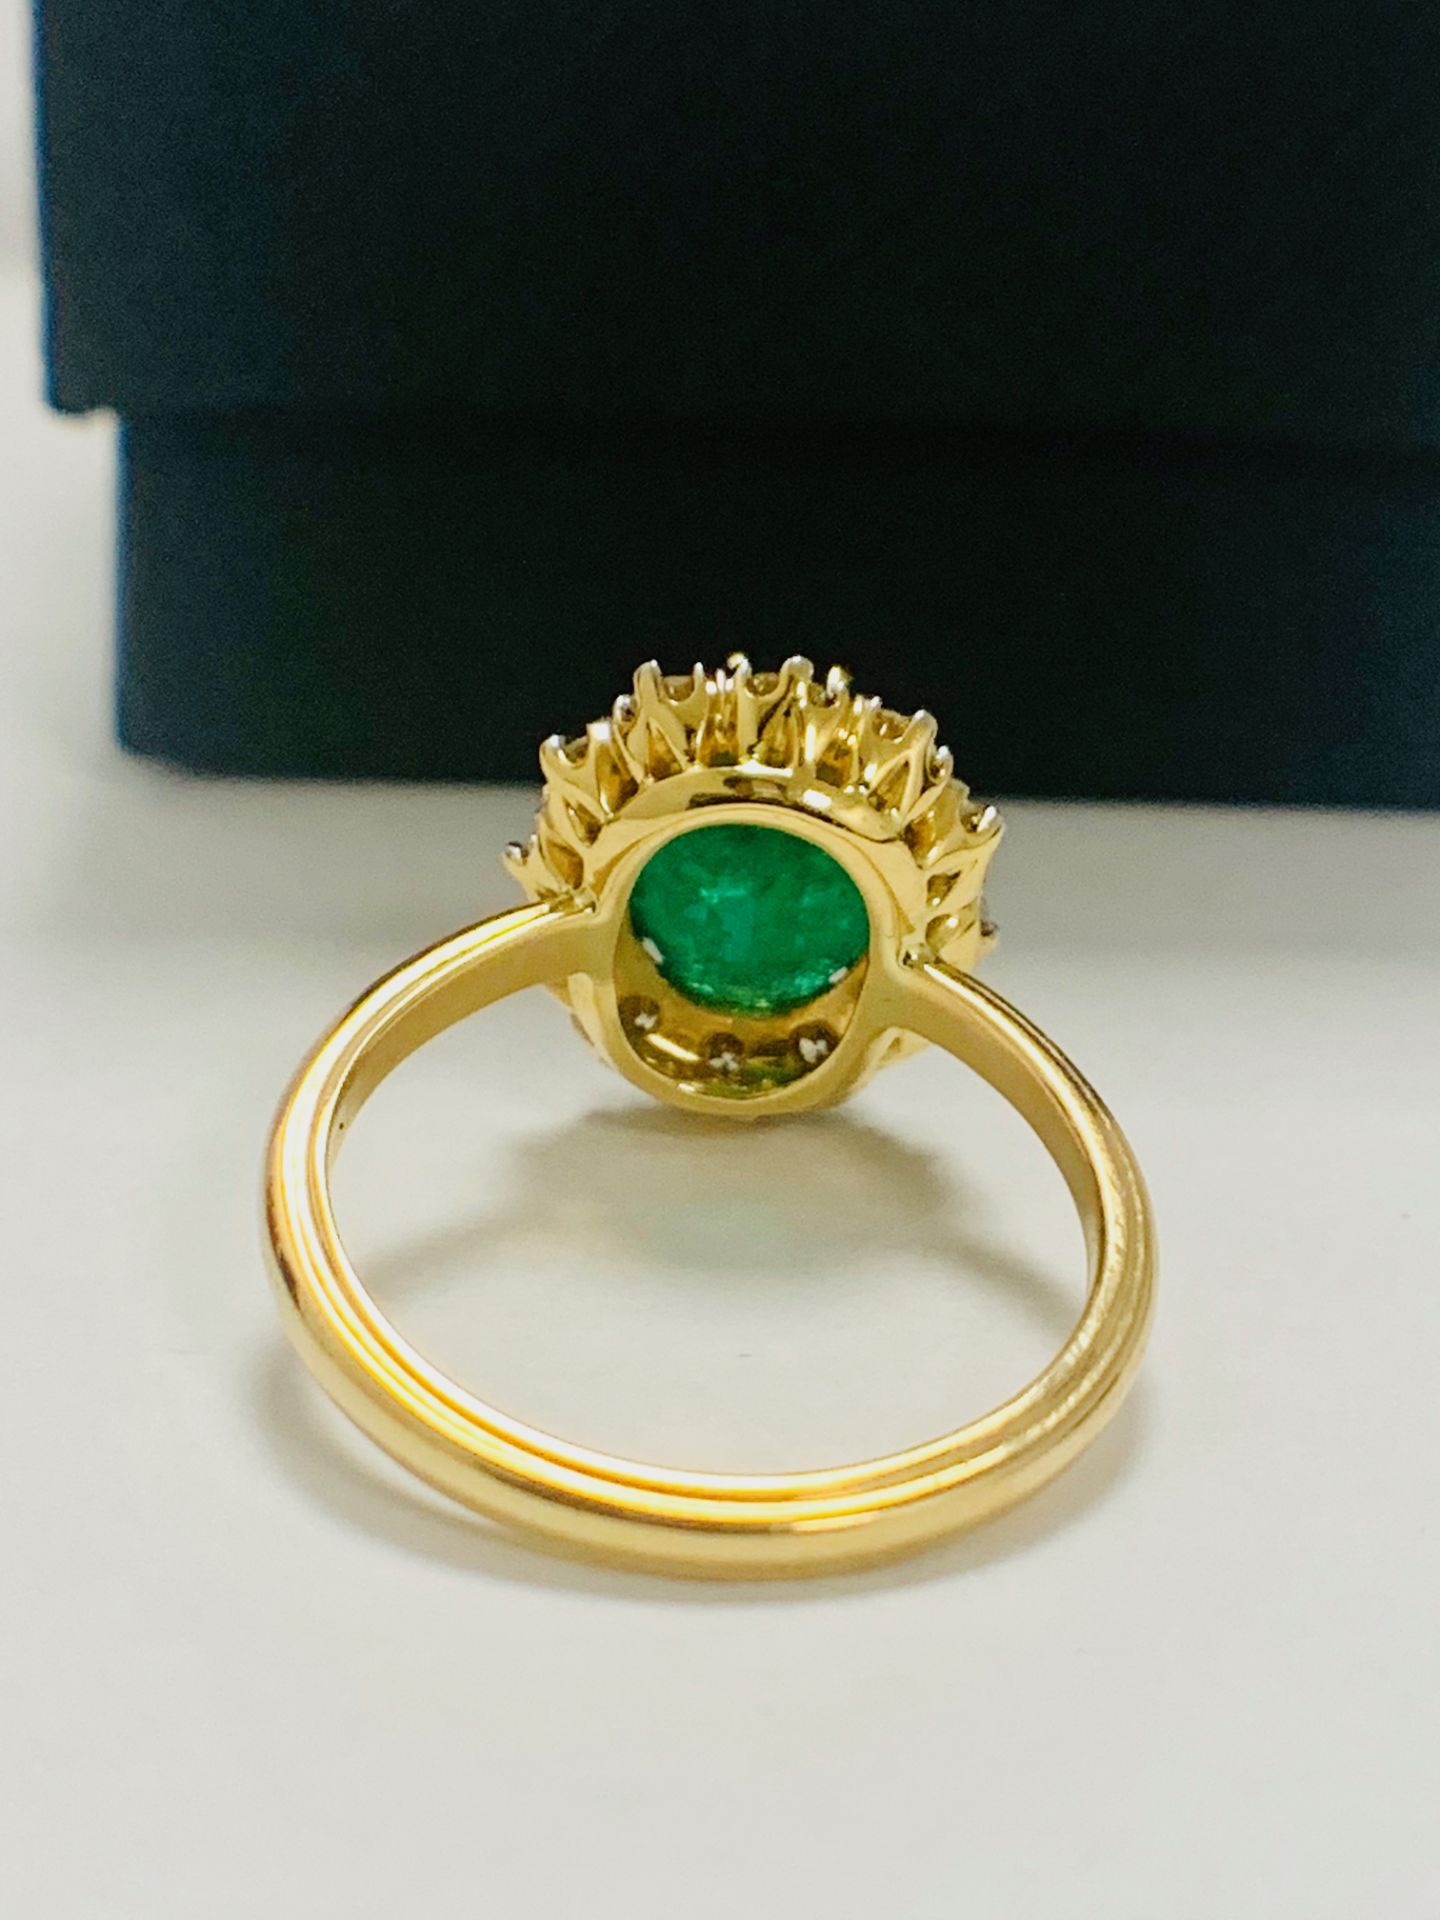 14ct Yellow Gold Emerald and Diamond Ring Featuring Centre, Oval Cut, Dark Green Emerald - Image 5 of 12